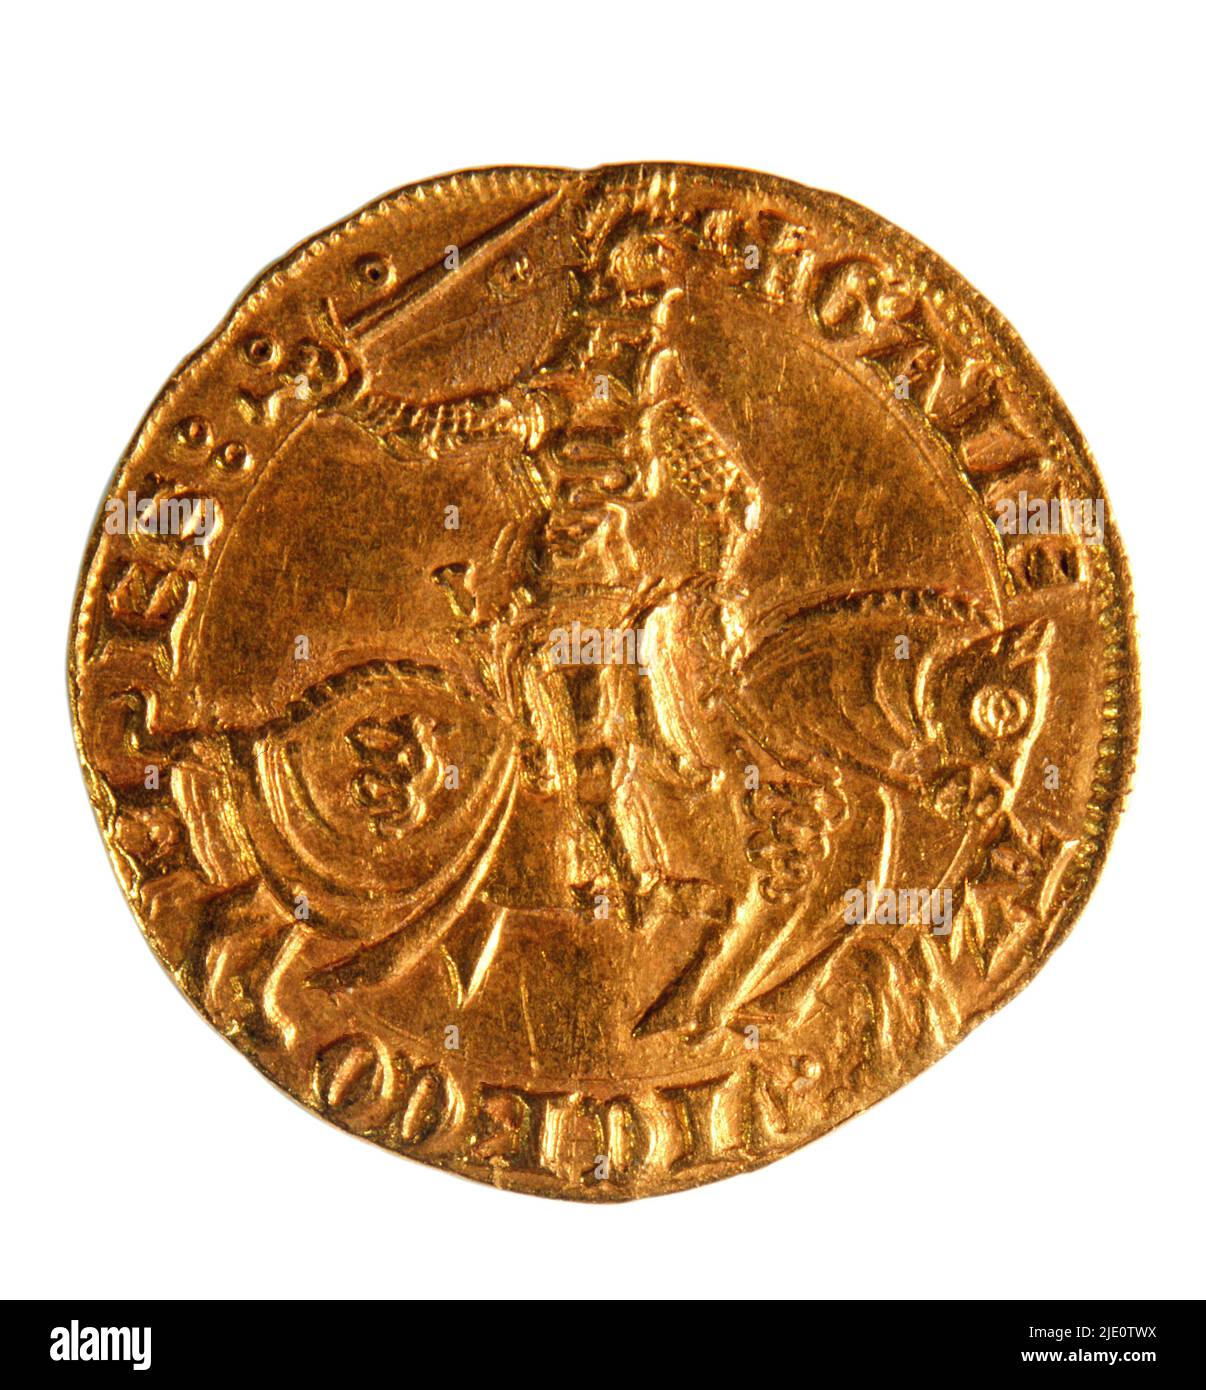 Milan, Gian Galeazzo Visconti 1385-1402. Back  Florin or duchy, with the duke on horseback and shield, helmet and crest. Gold, 3.42 g. Very rare. Stock Photo